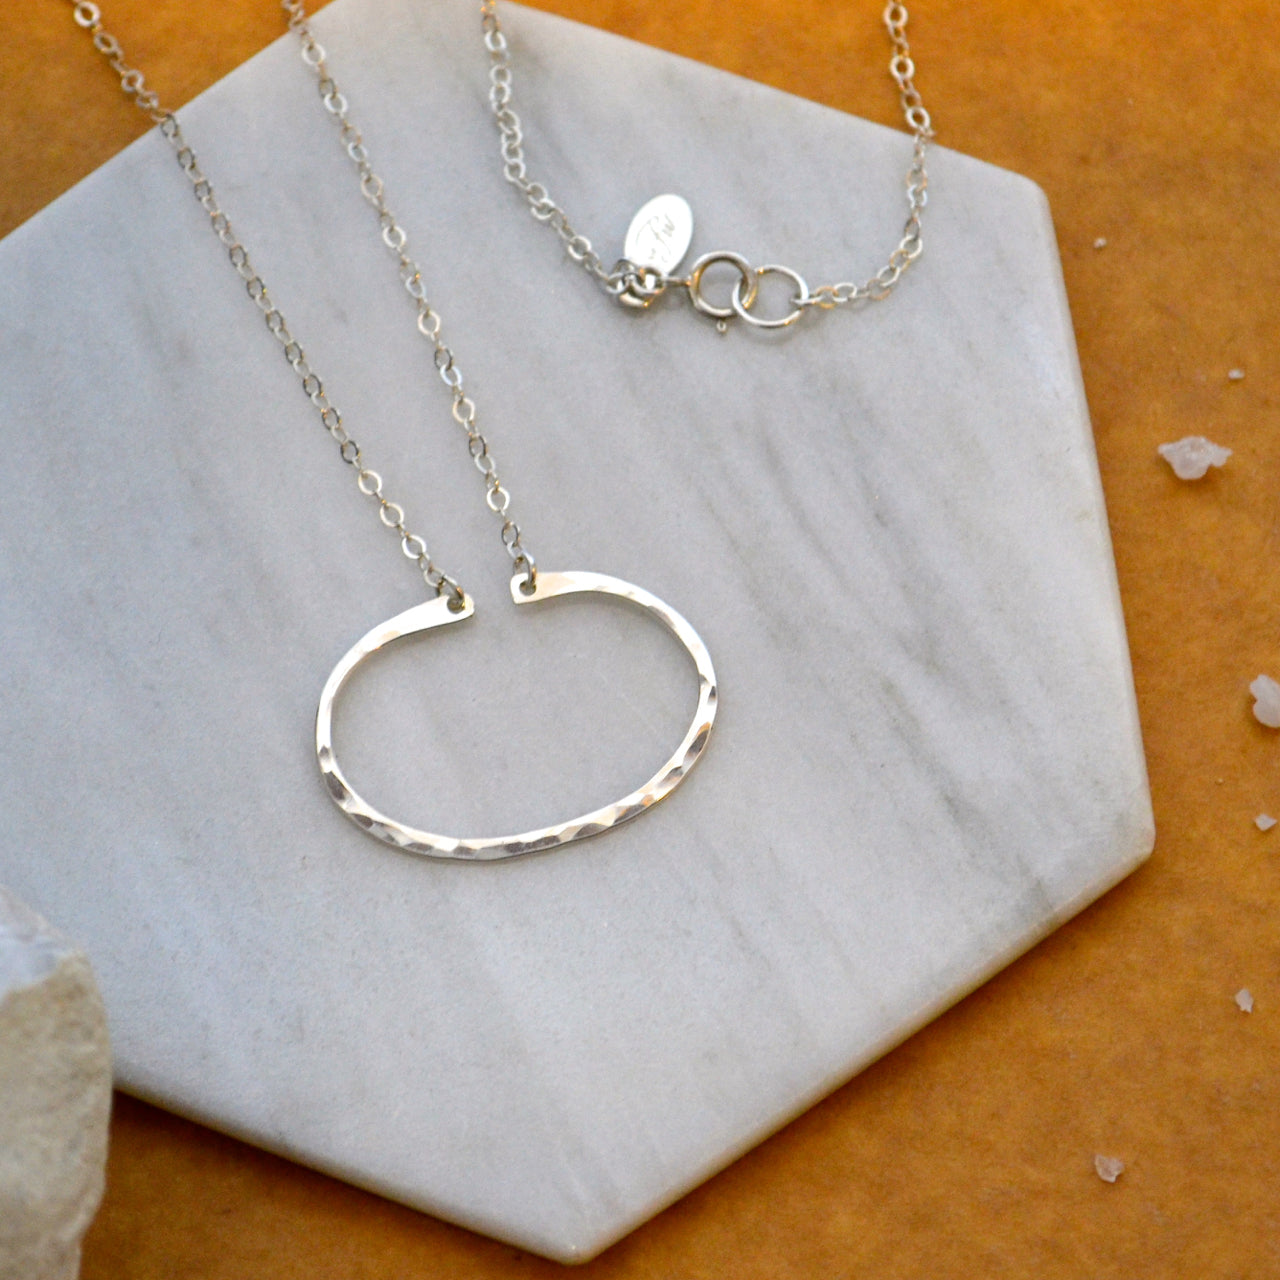 Canoe Petite Necklace - handmade oval hammered boating pendant necklace in 14k gold - Foamy Wader